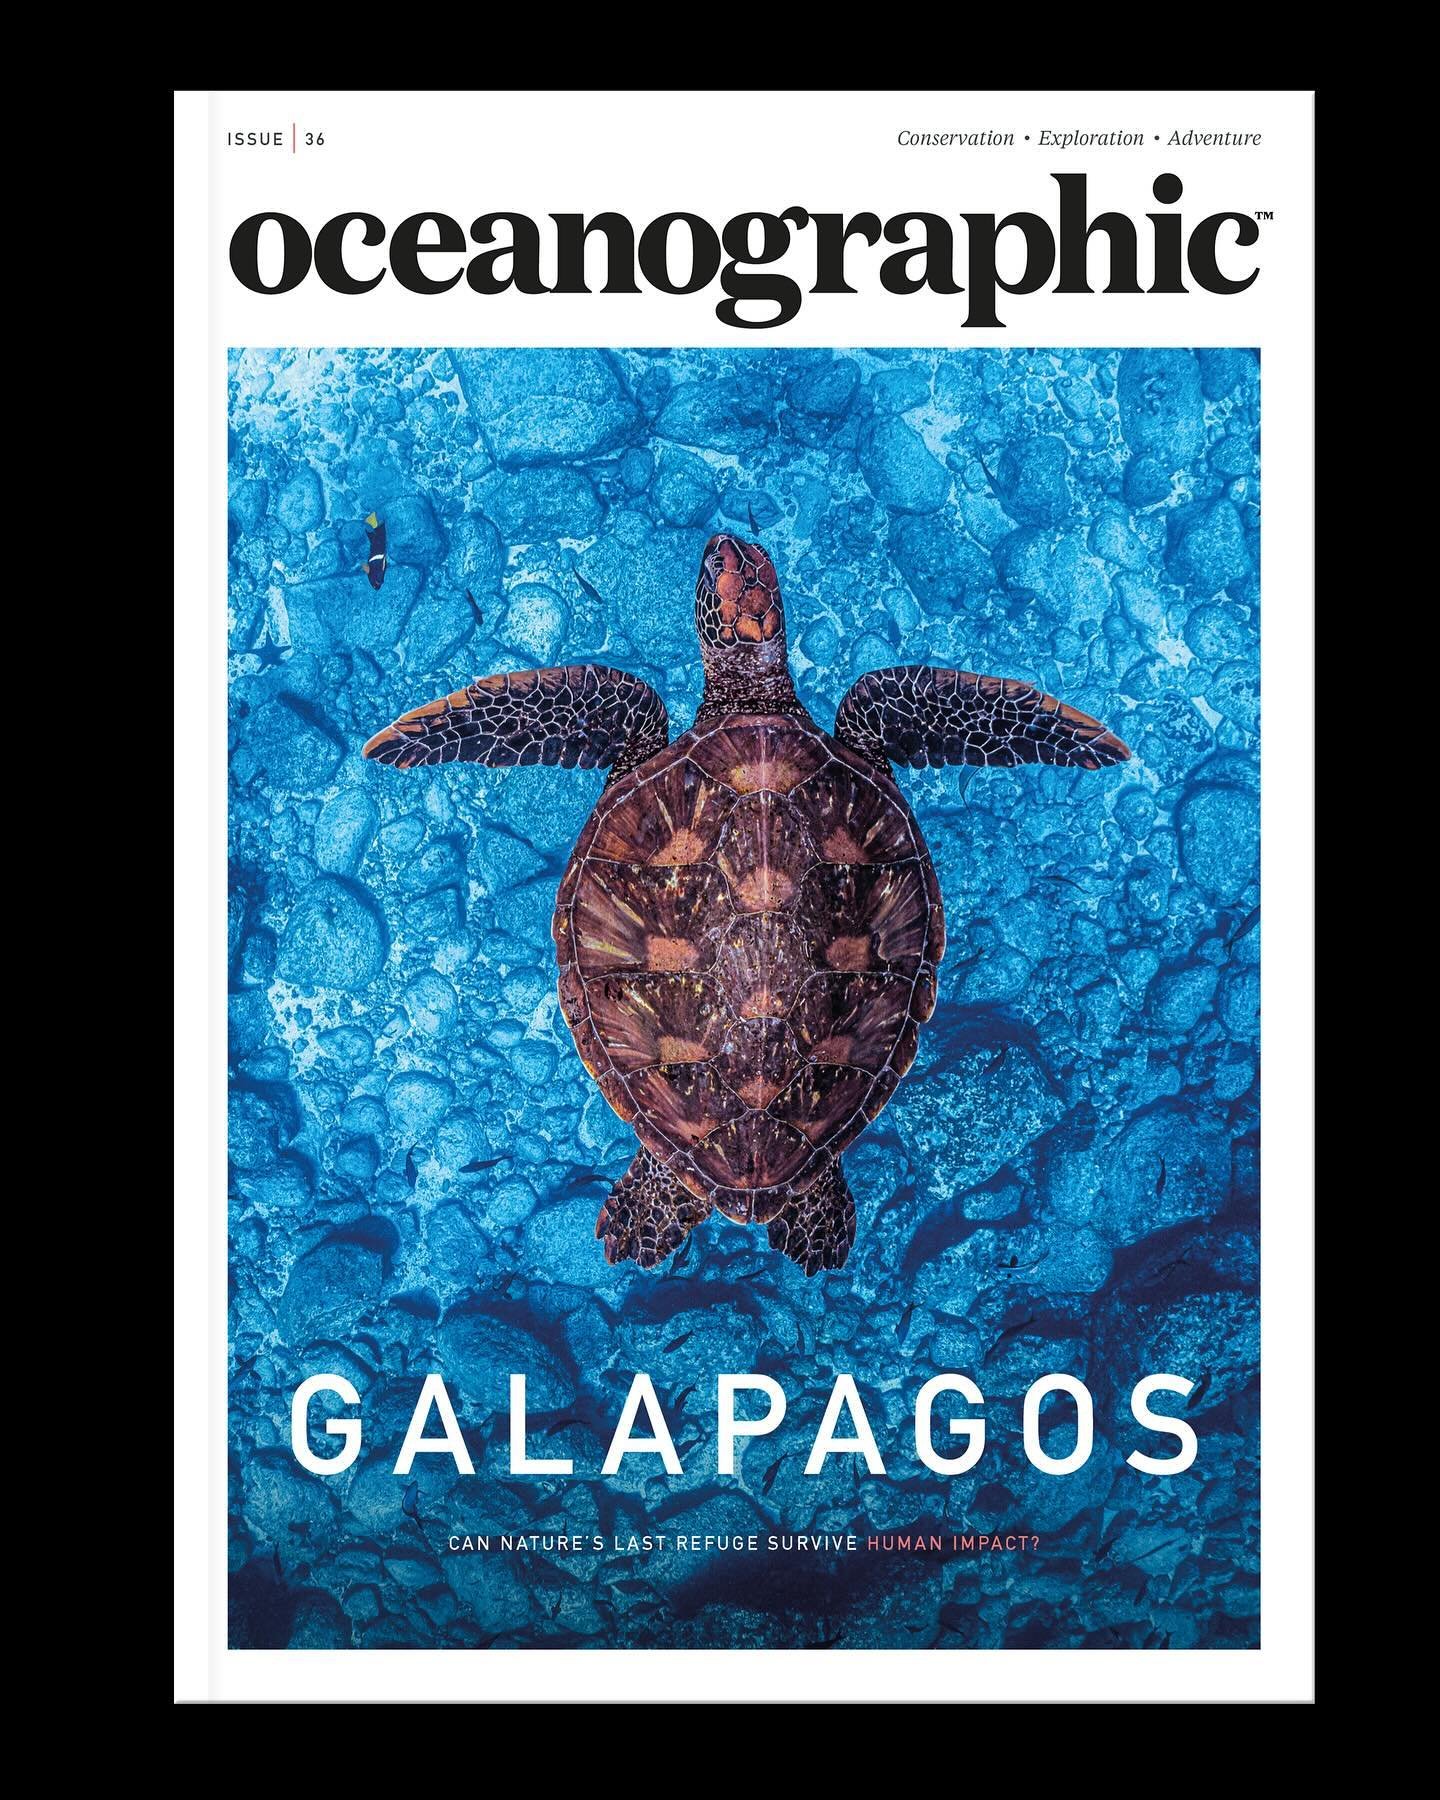 In a career which offers the rare privilege of reporting from many of the ocean&rsquo;s most rich and spectacular regions, the Galapagos has marked me as one of the most extraordinary, and I can barely restrain my enthusiasm for the marine life which